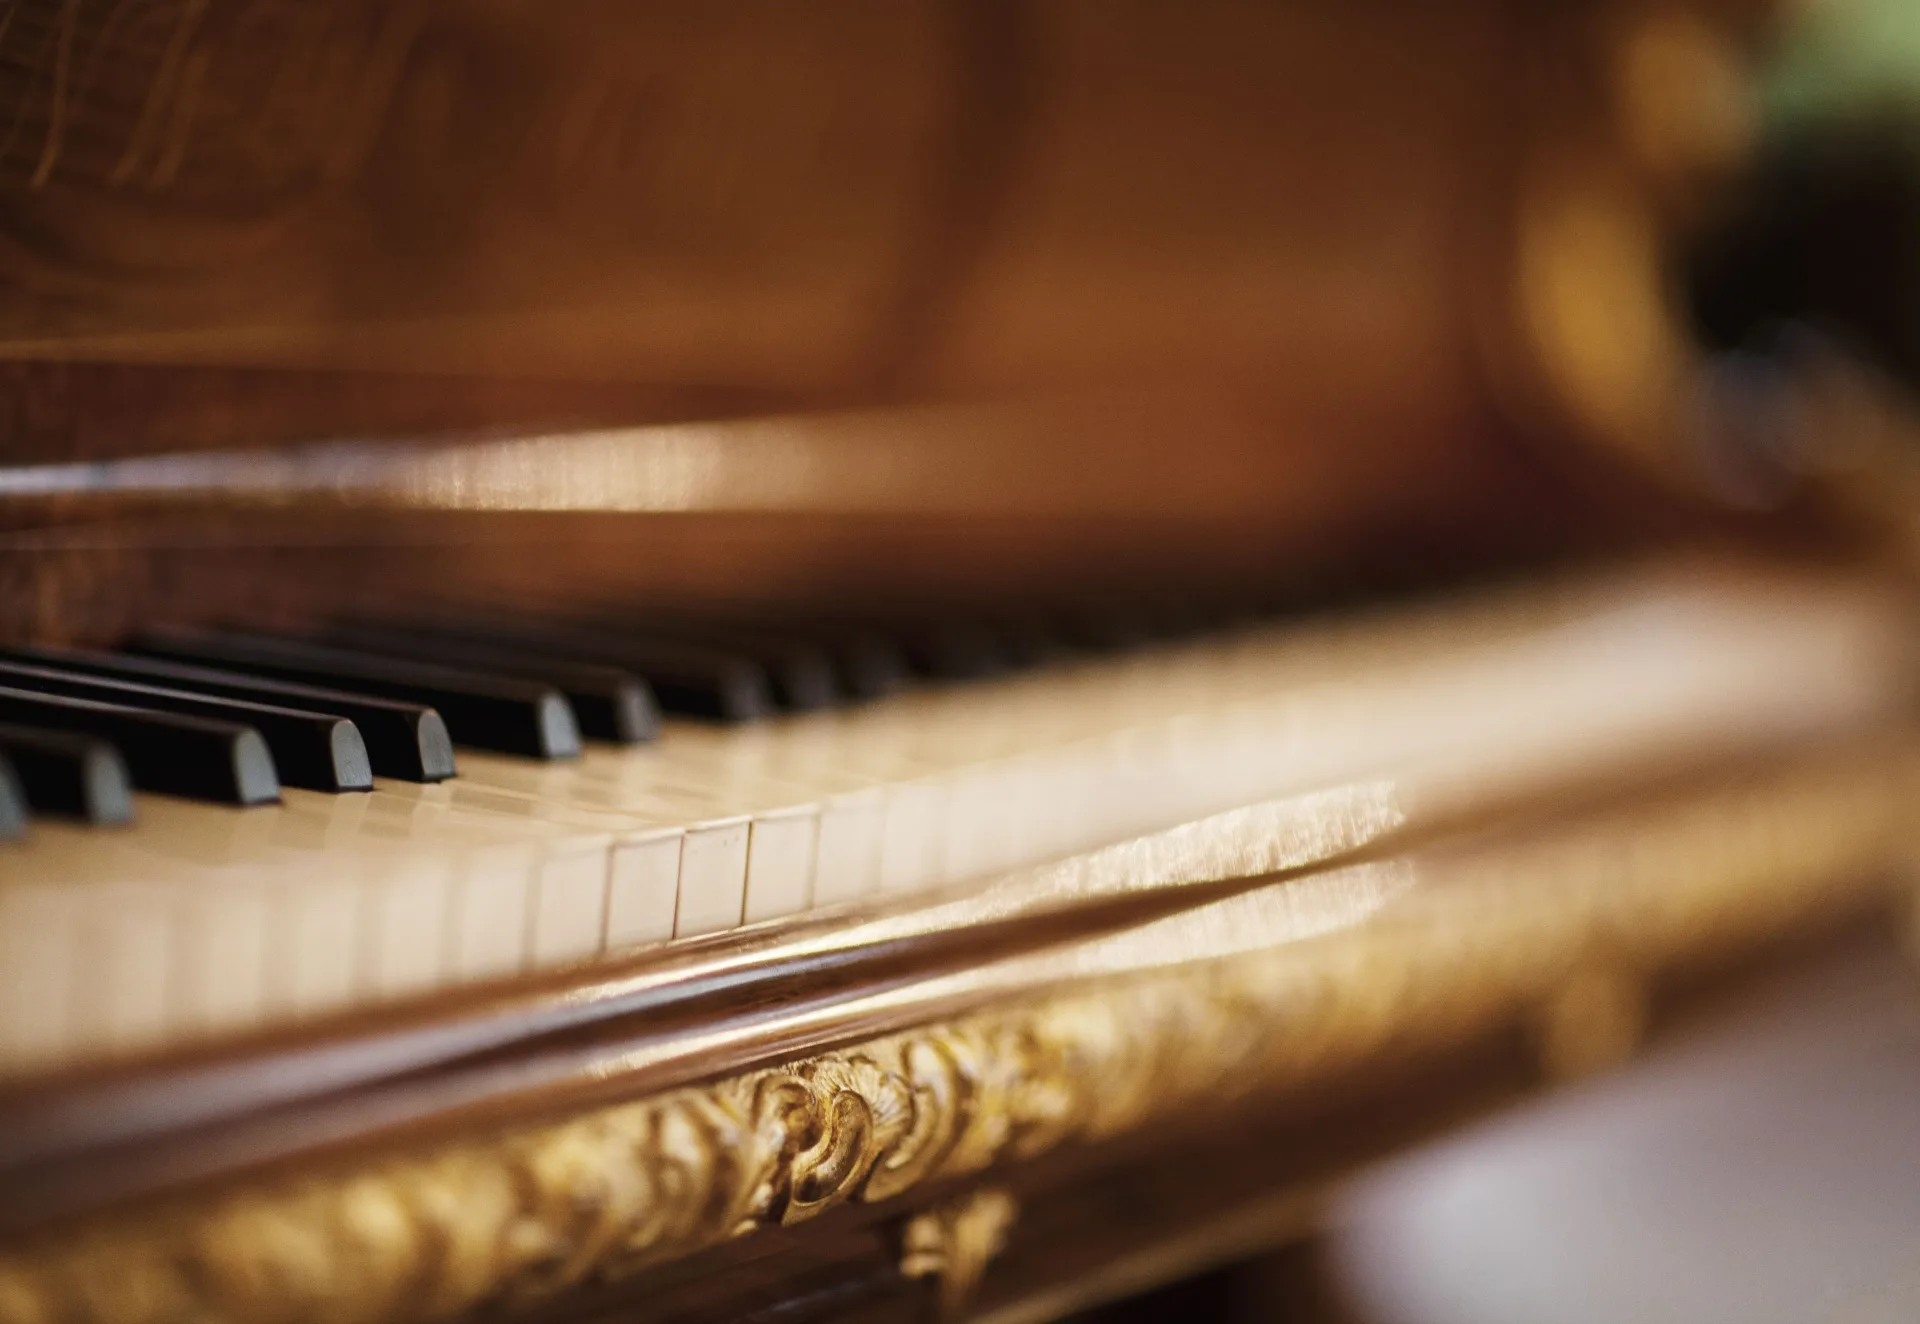 The keys and details of a grand piano located in the museum's main salon